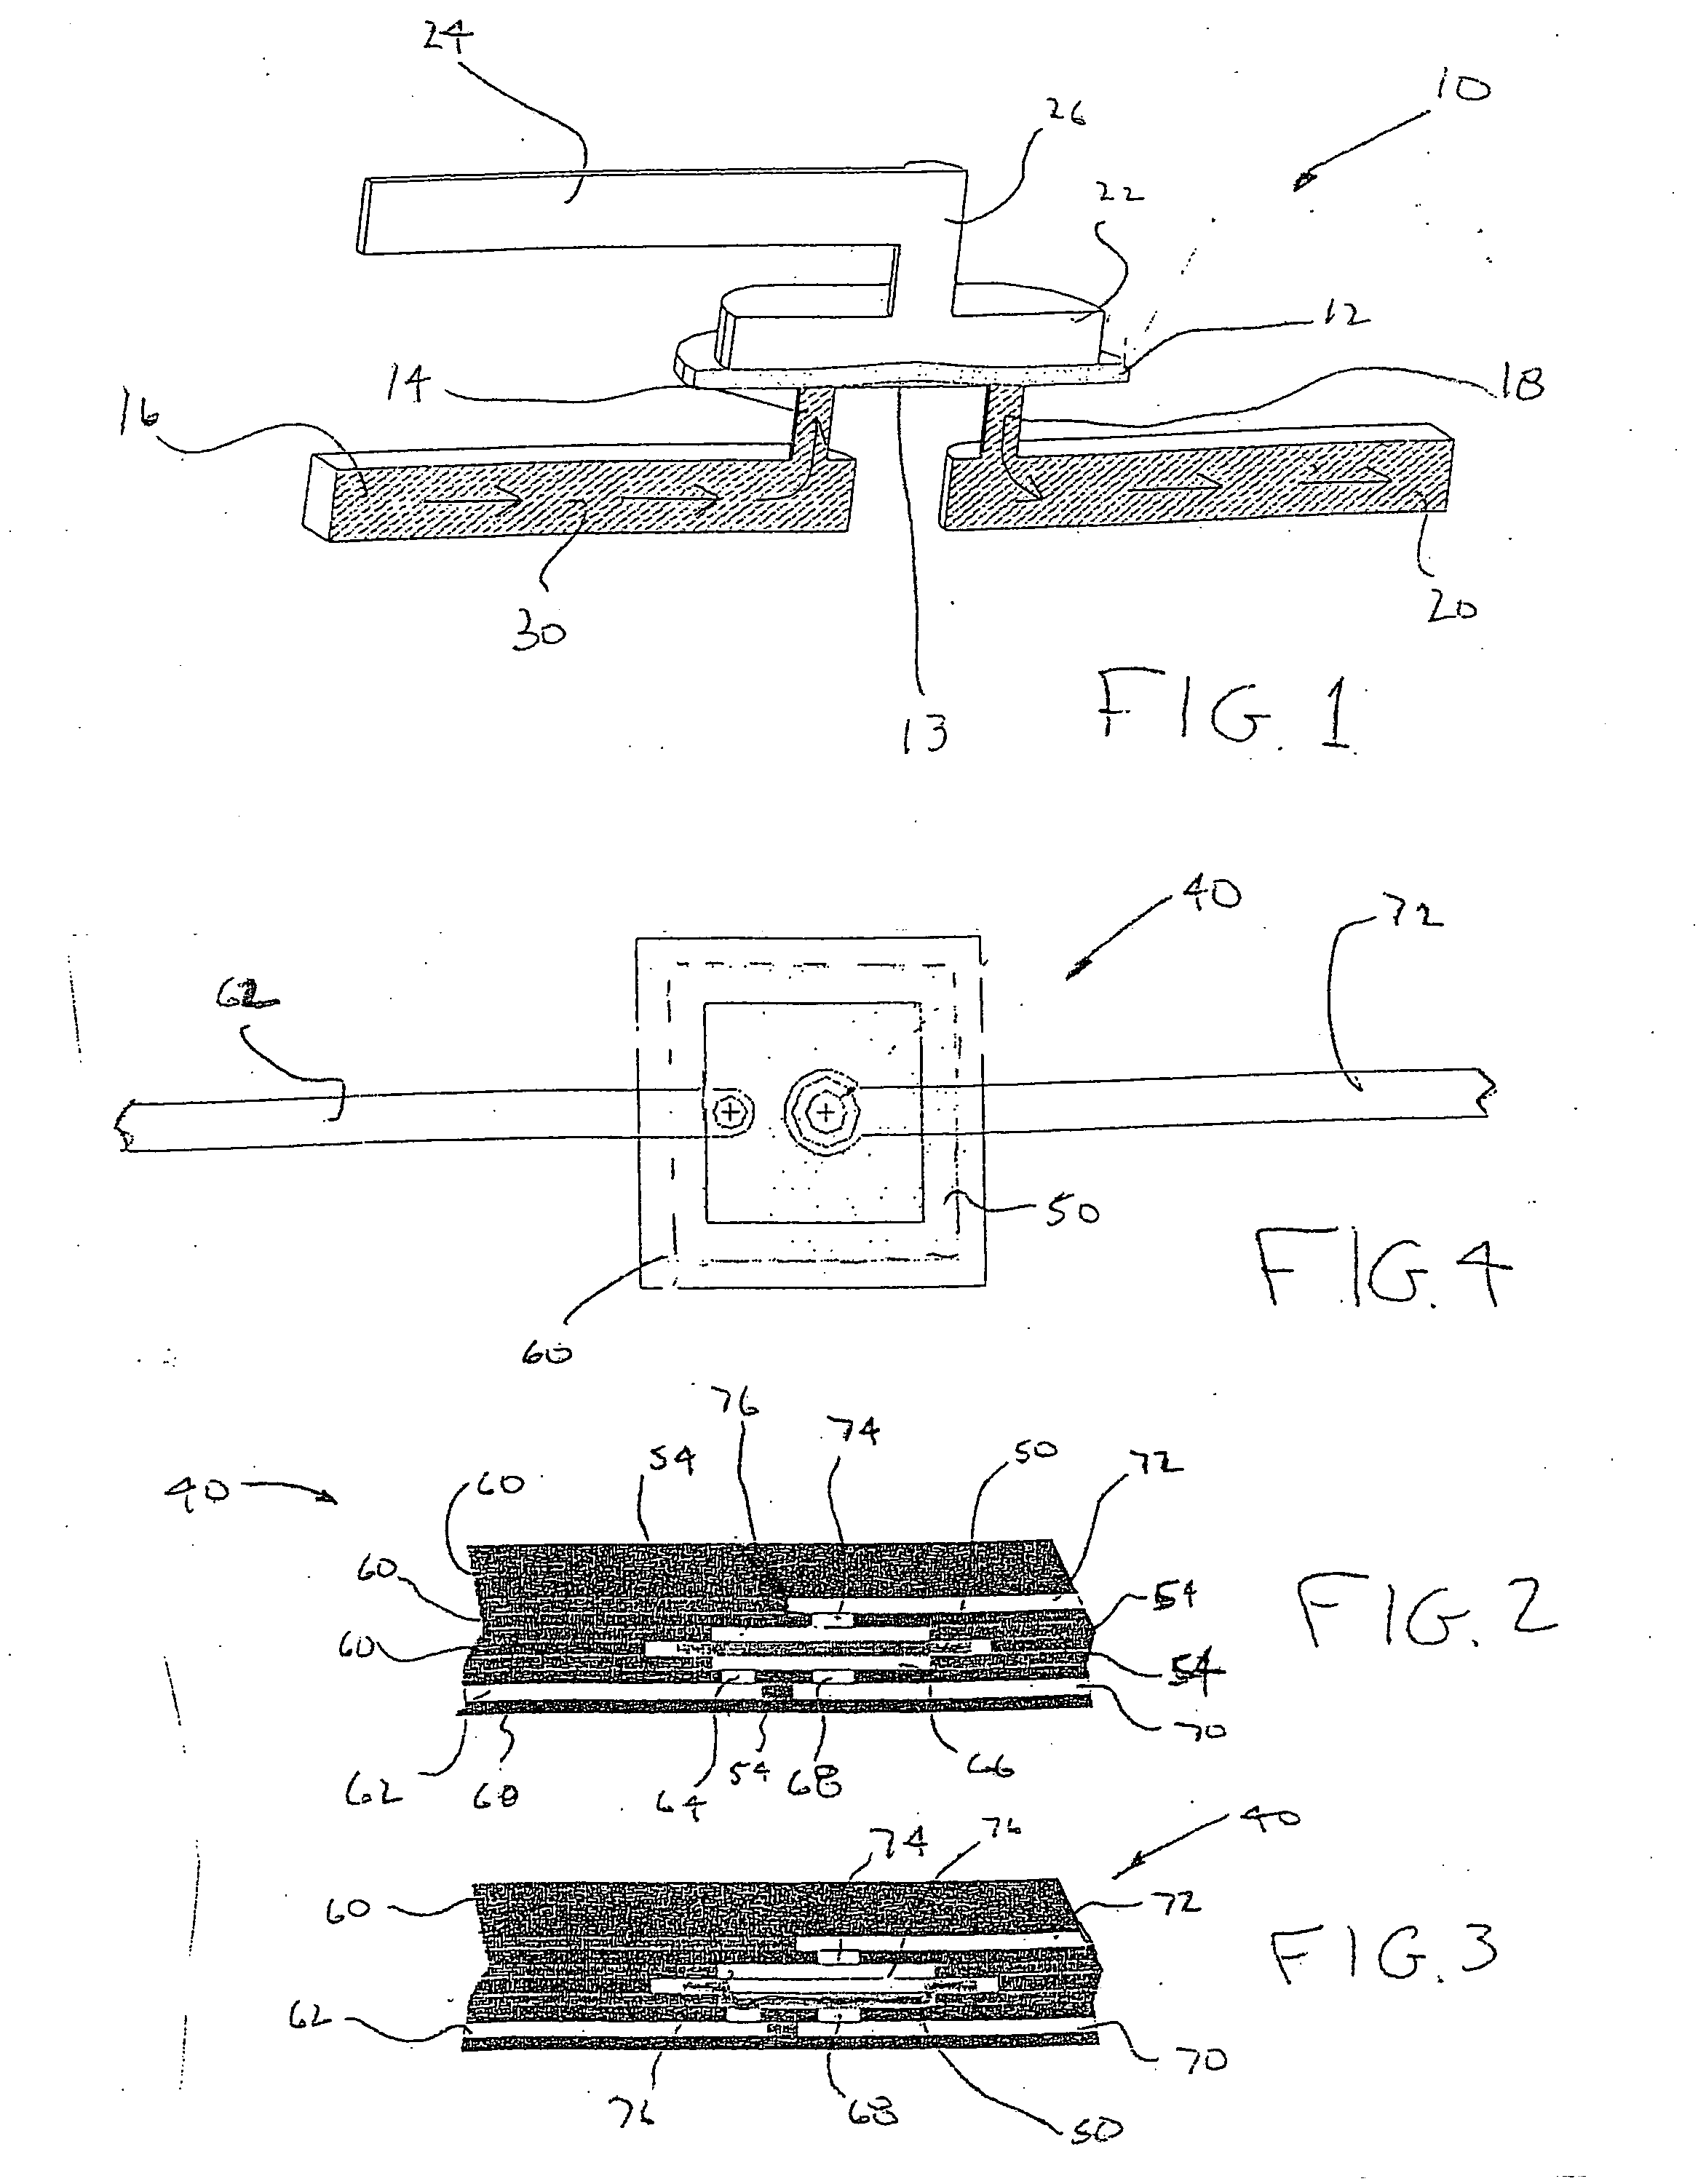 Pneumatic valve interface for use in microfluidic structures